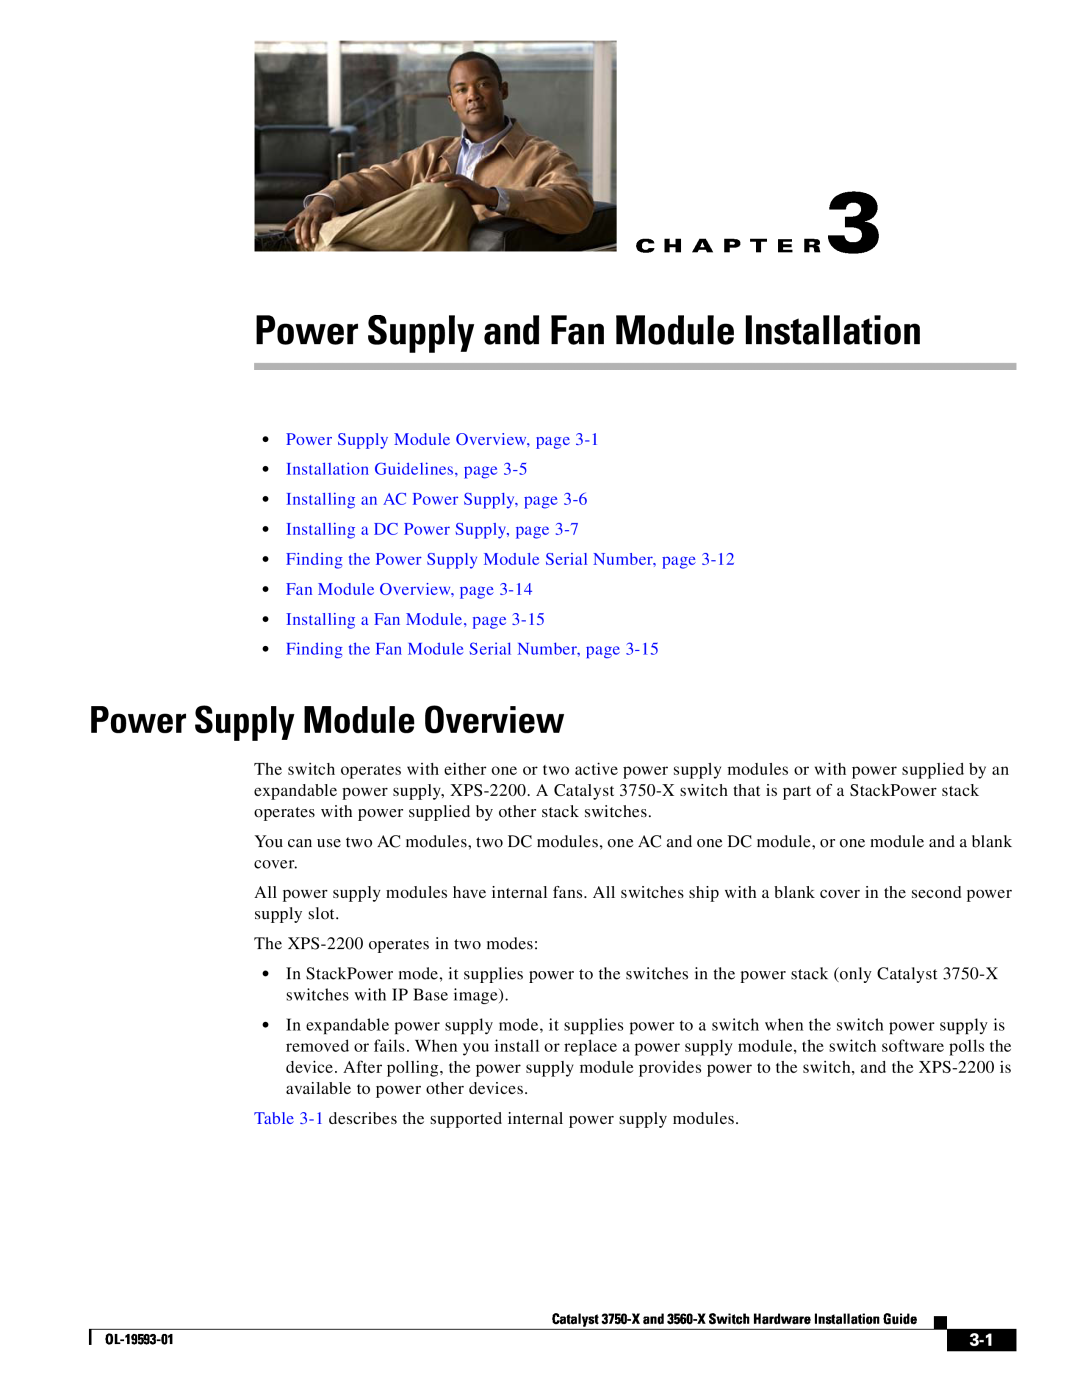 Cisco Systems 3560-X, 3750-X manual Power Supply and Fan Module Installation, Power Supply Module Overview, C H A P T E R 